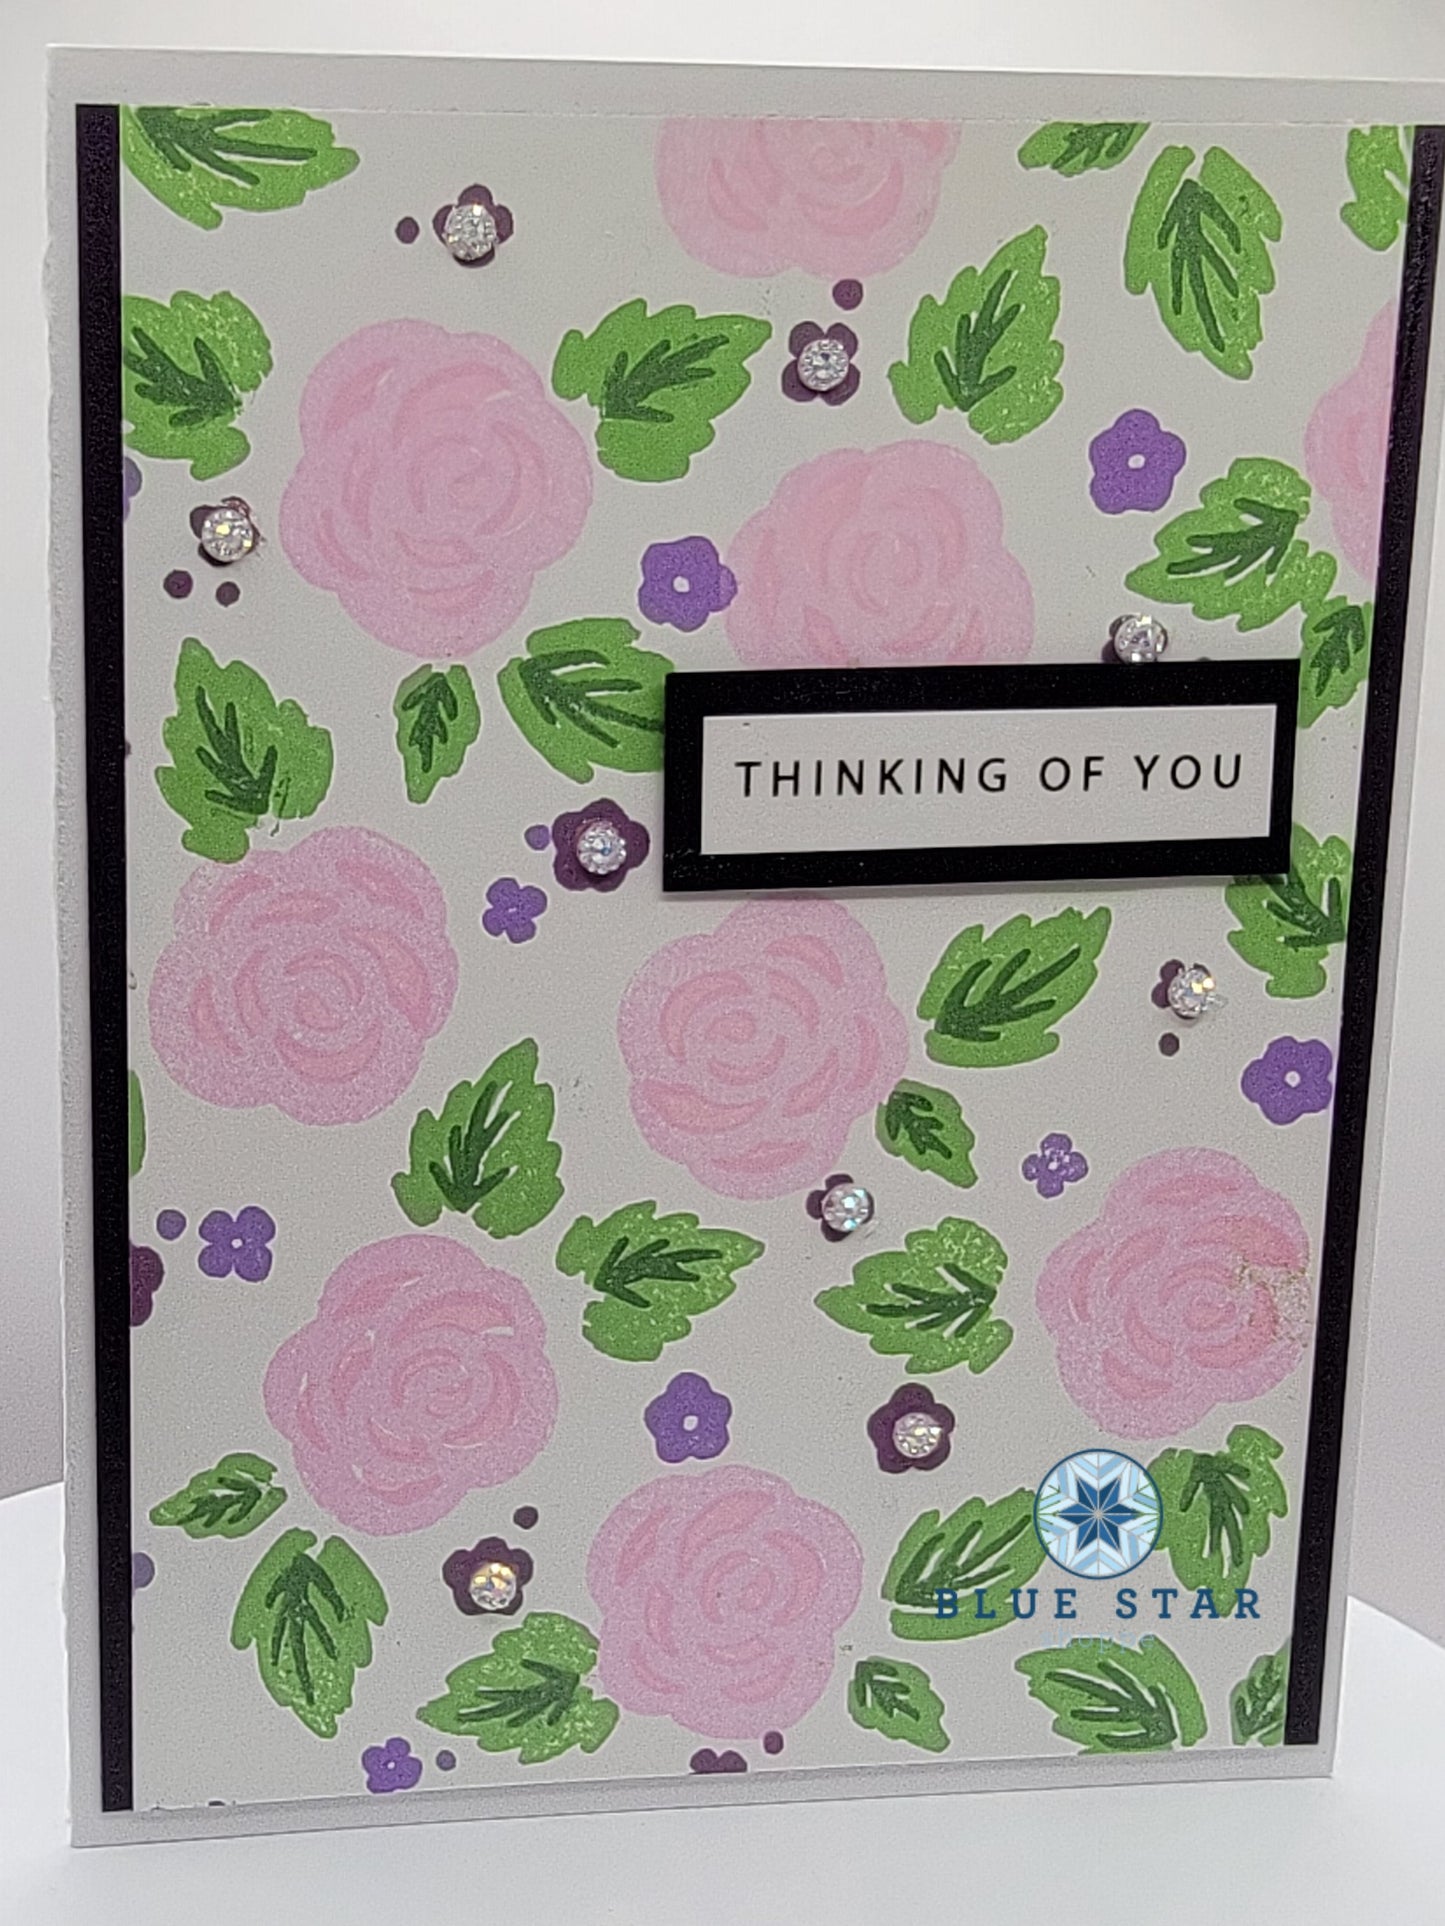 Thinking of You - pink floral background